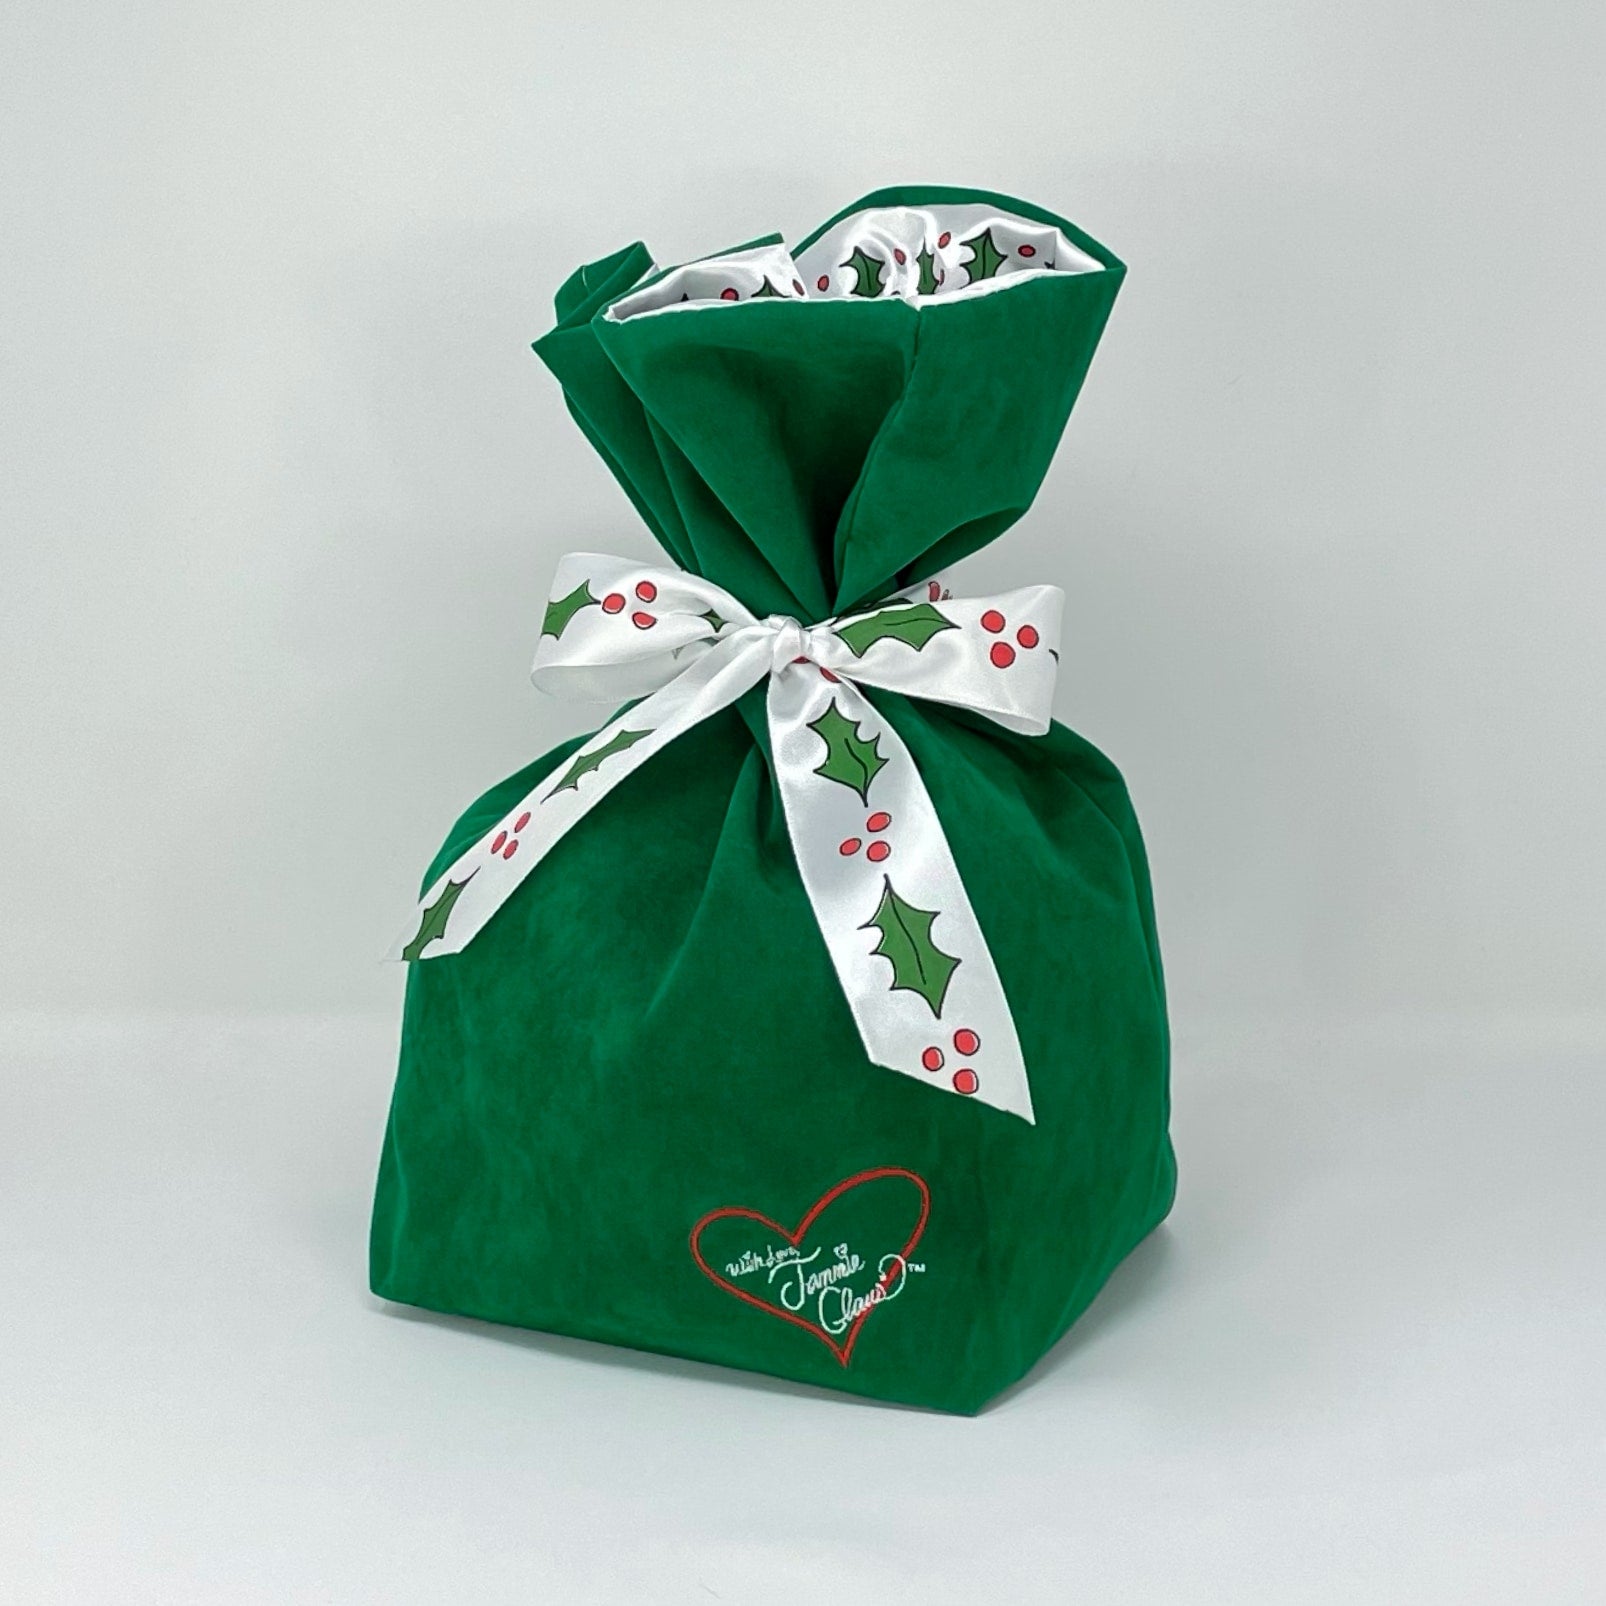 Jammie Claus Signature Bag that is green with a white bow that has holly printed on it and the bag as the Jammie Claus heart logo